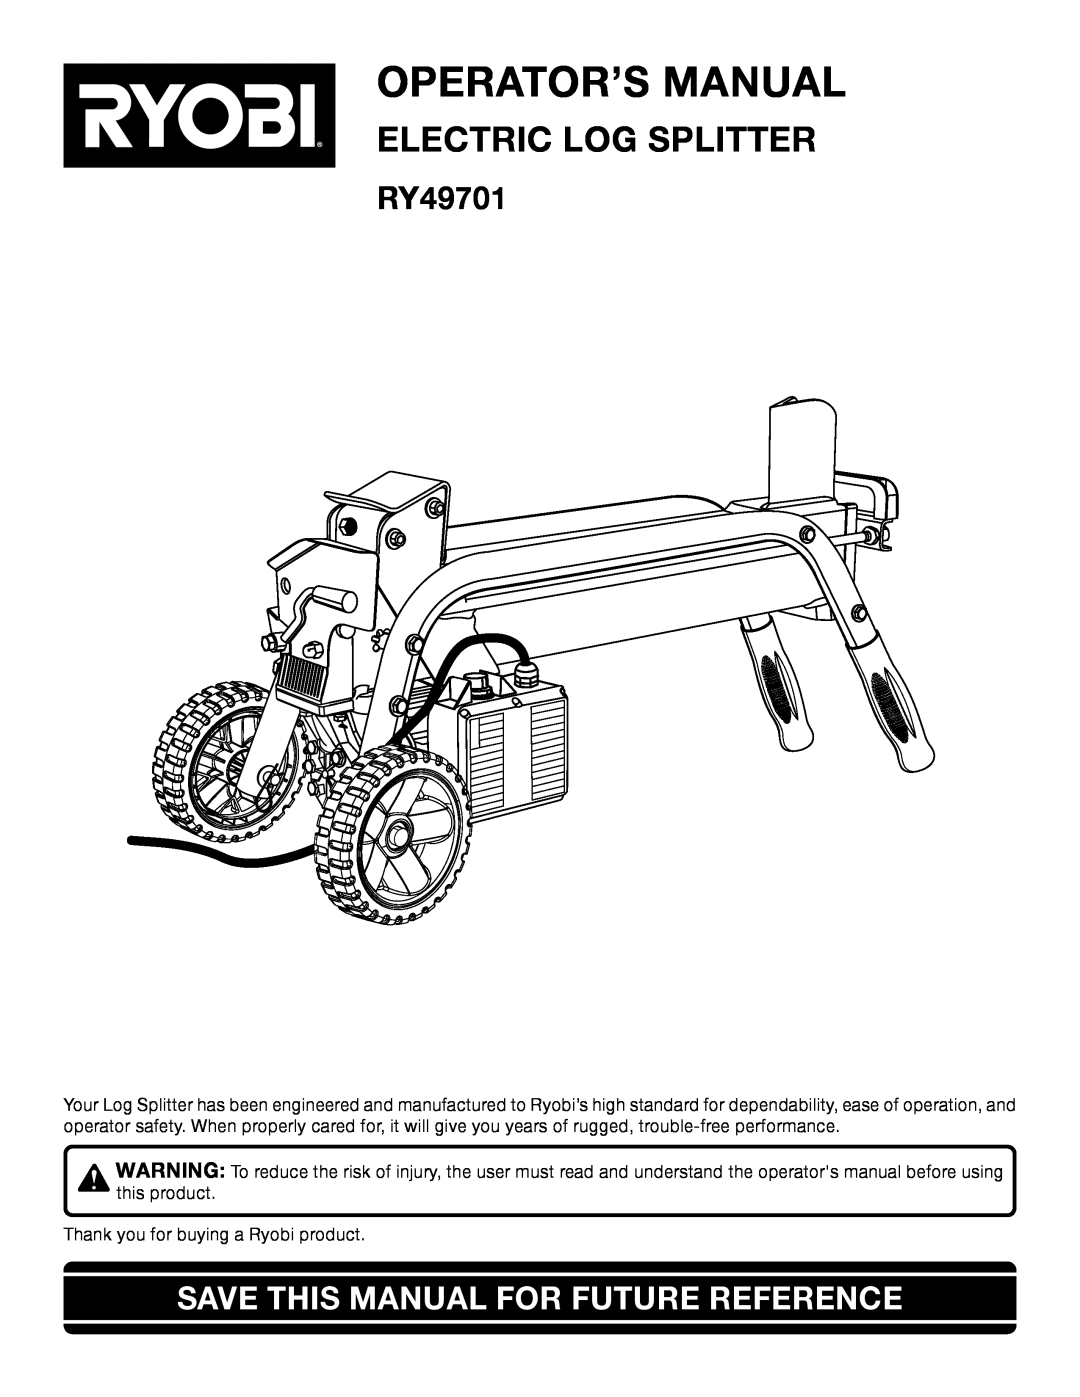 Ryobi Outdoor RY49701 manual Operator’S Manual, Electric Log Splitter, Save This Manual For Future Reference 